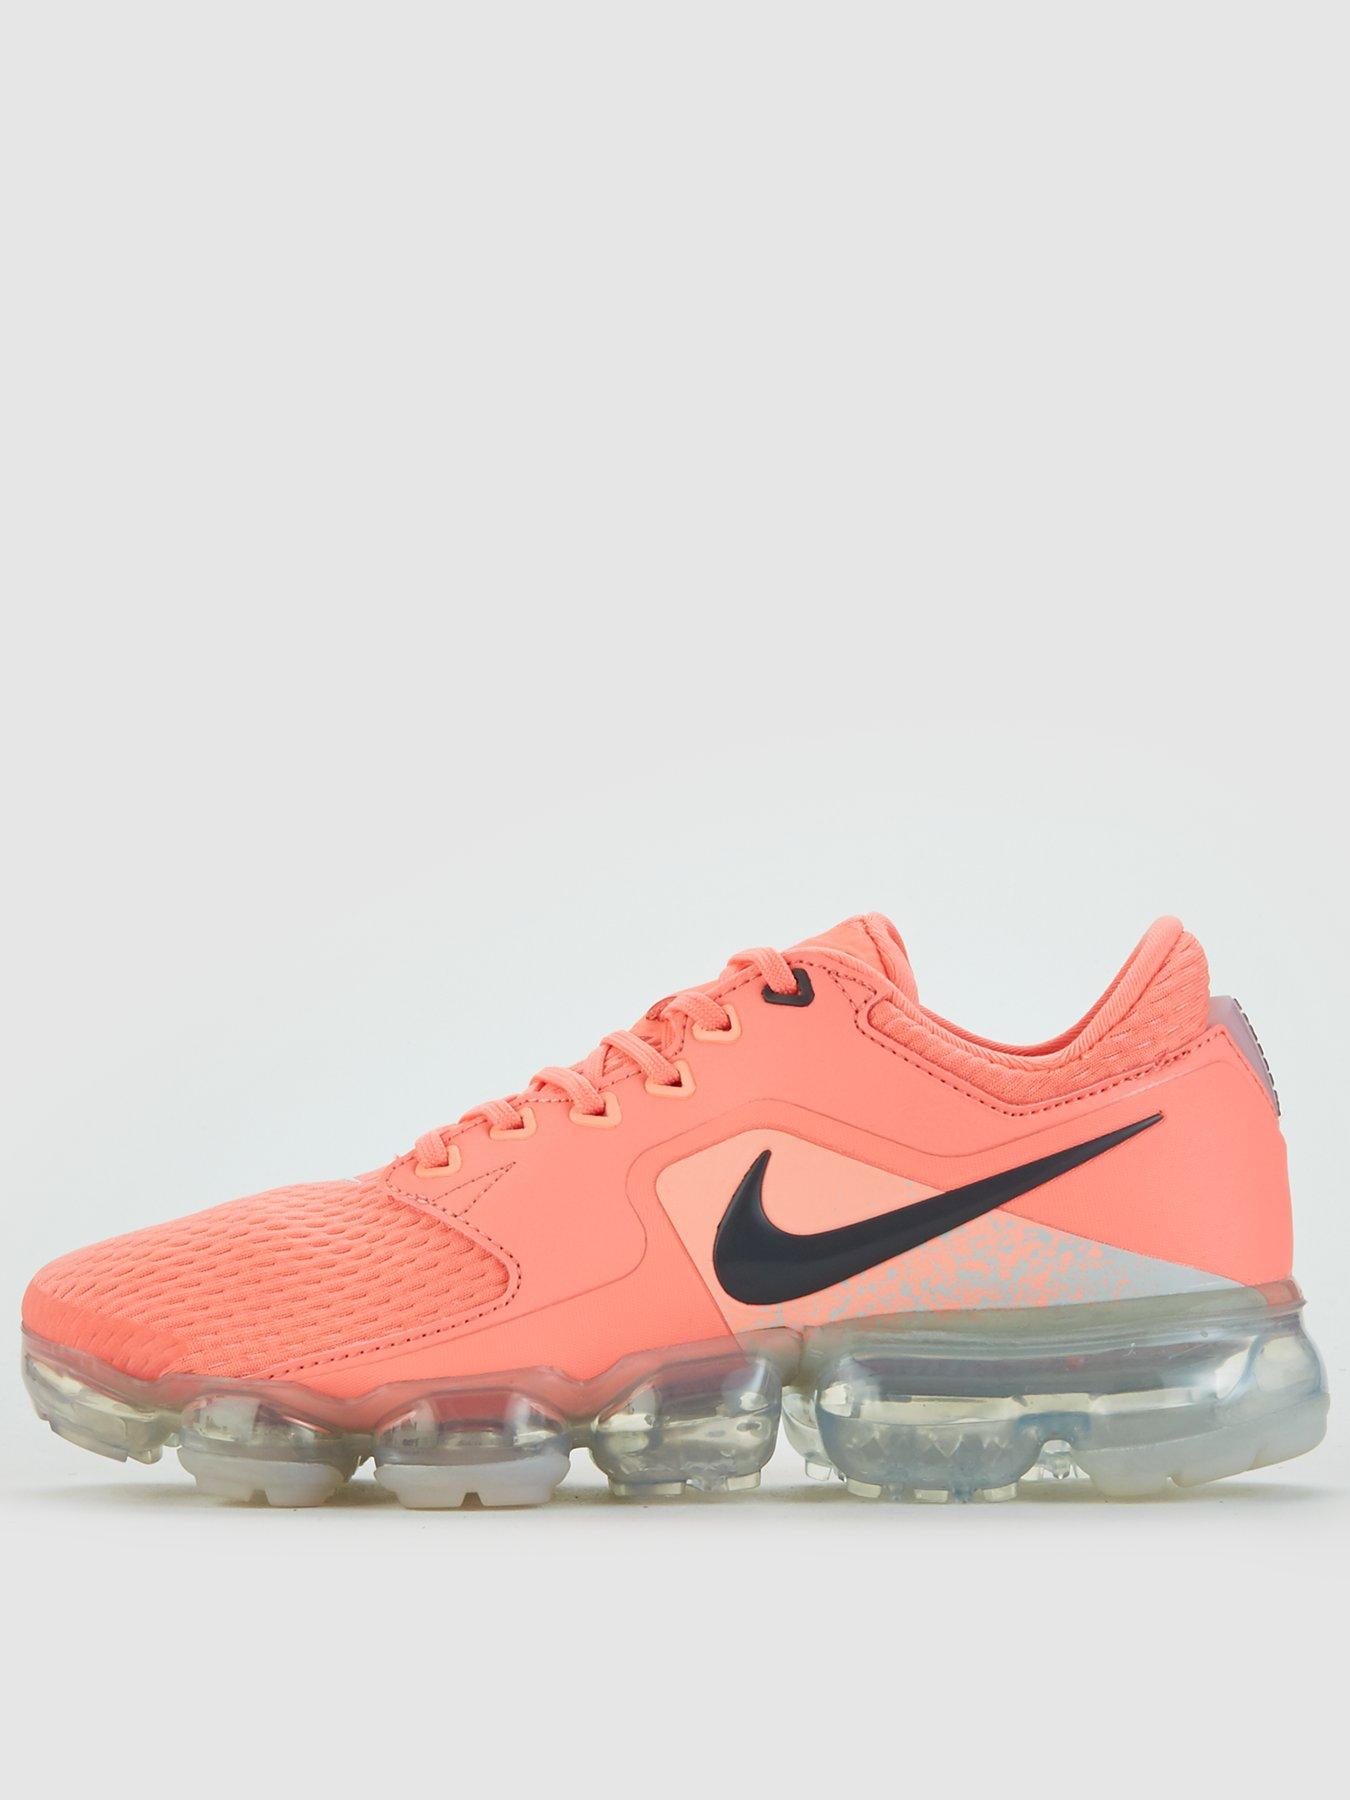 nike vapormax buy now pay later